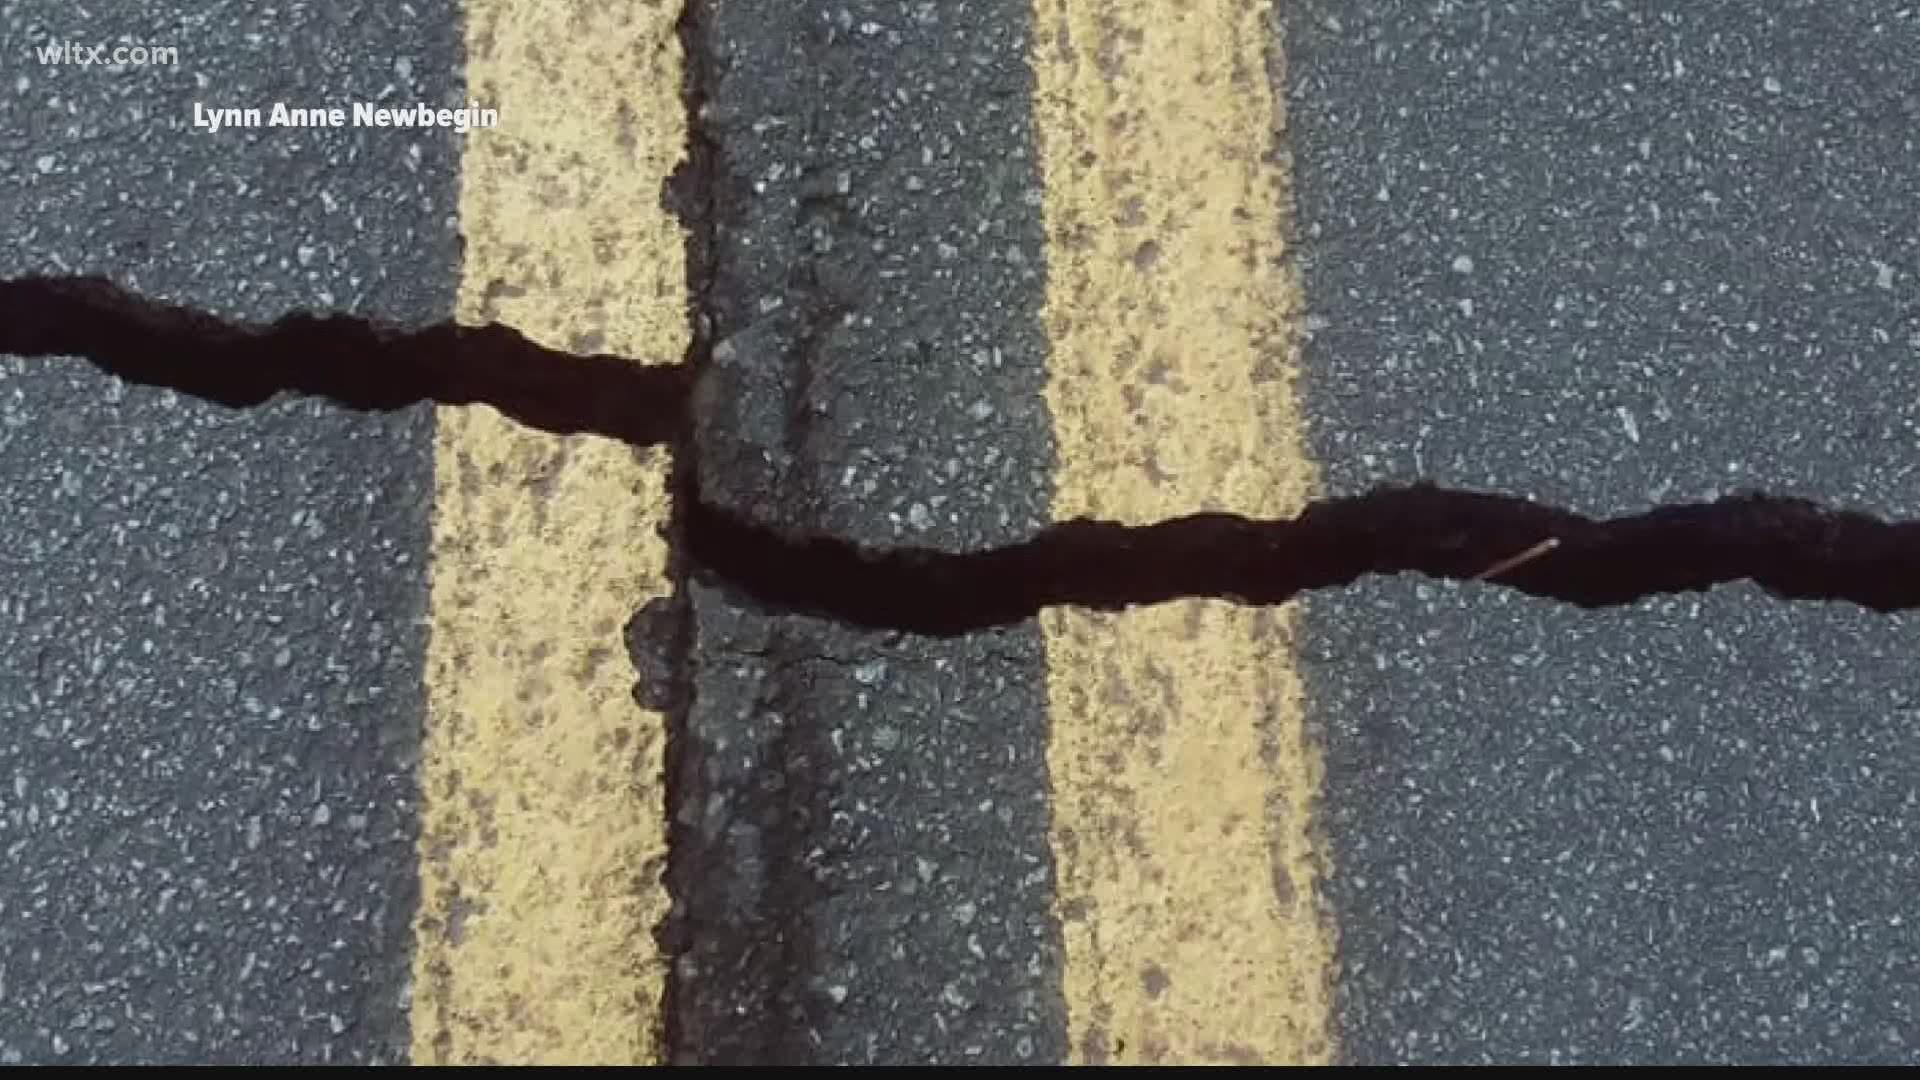 Earthquakes of this magnitude often occur along the East Coast every decade or so, according to a USC professor.